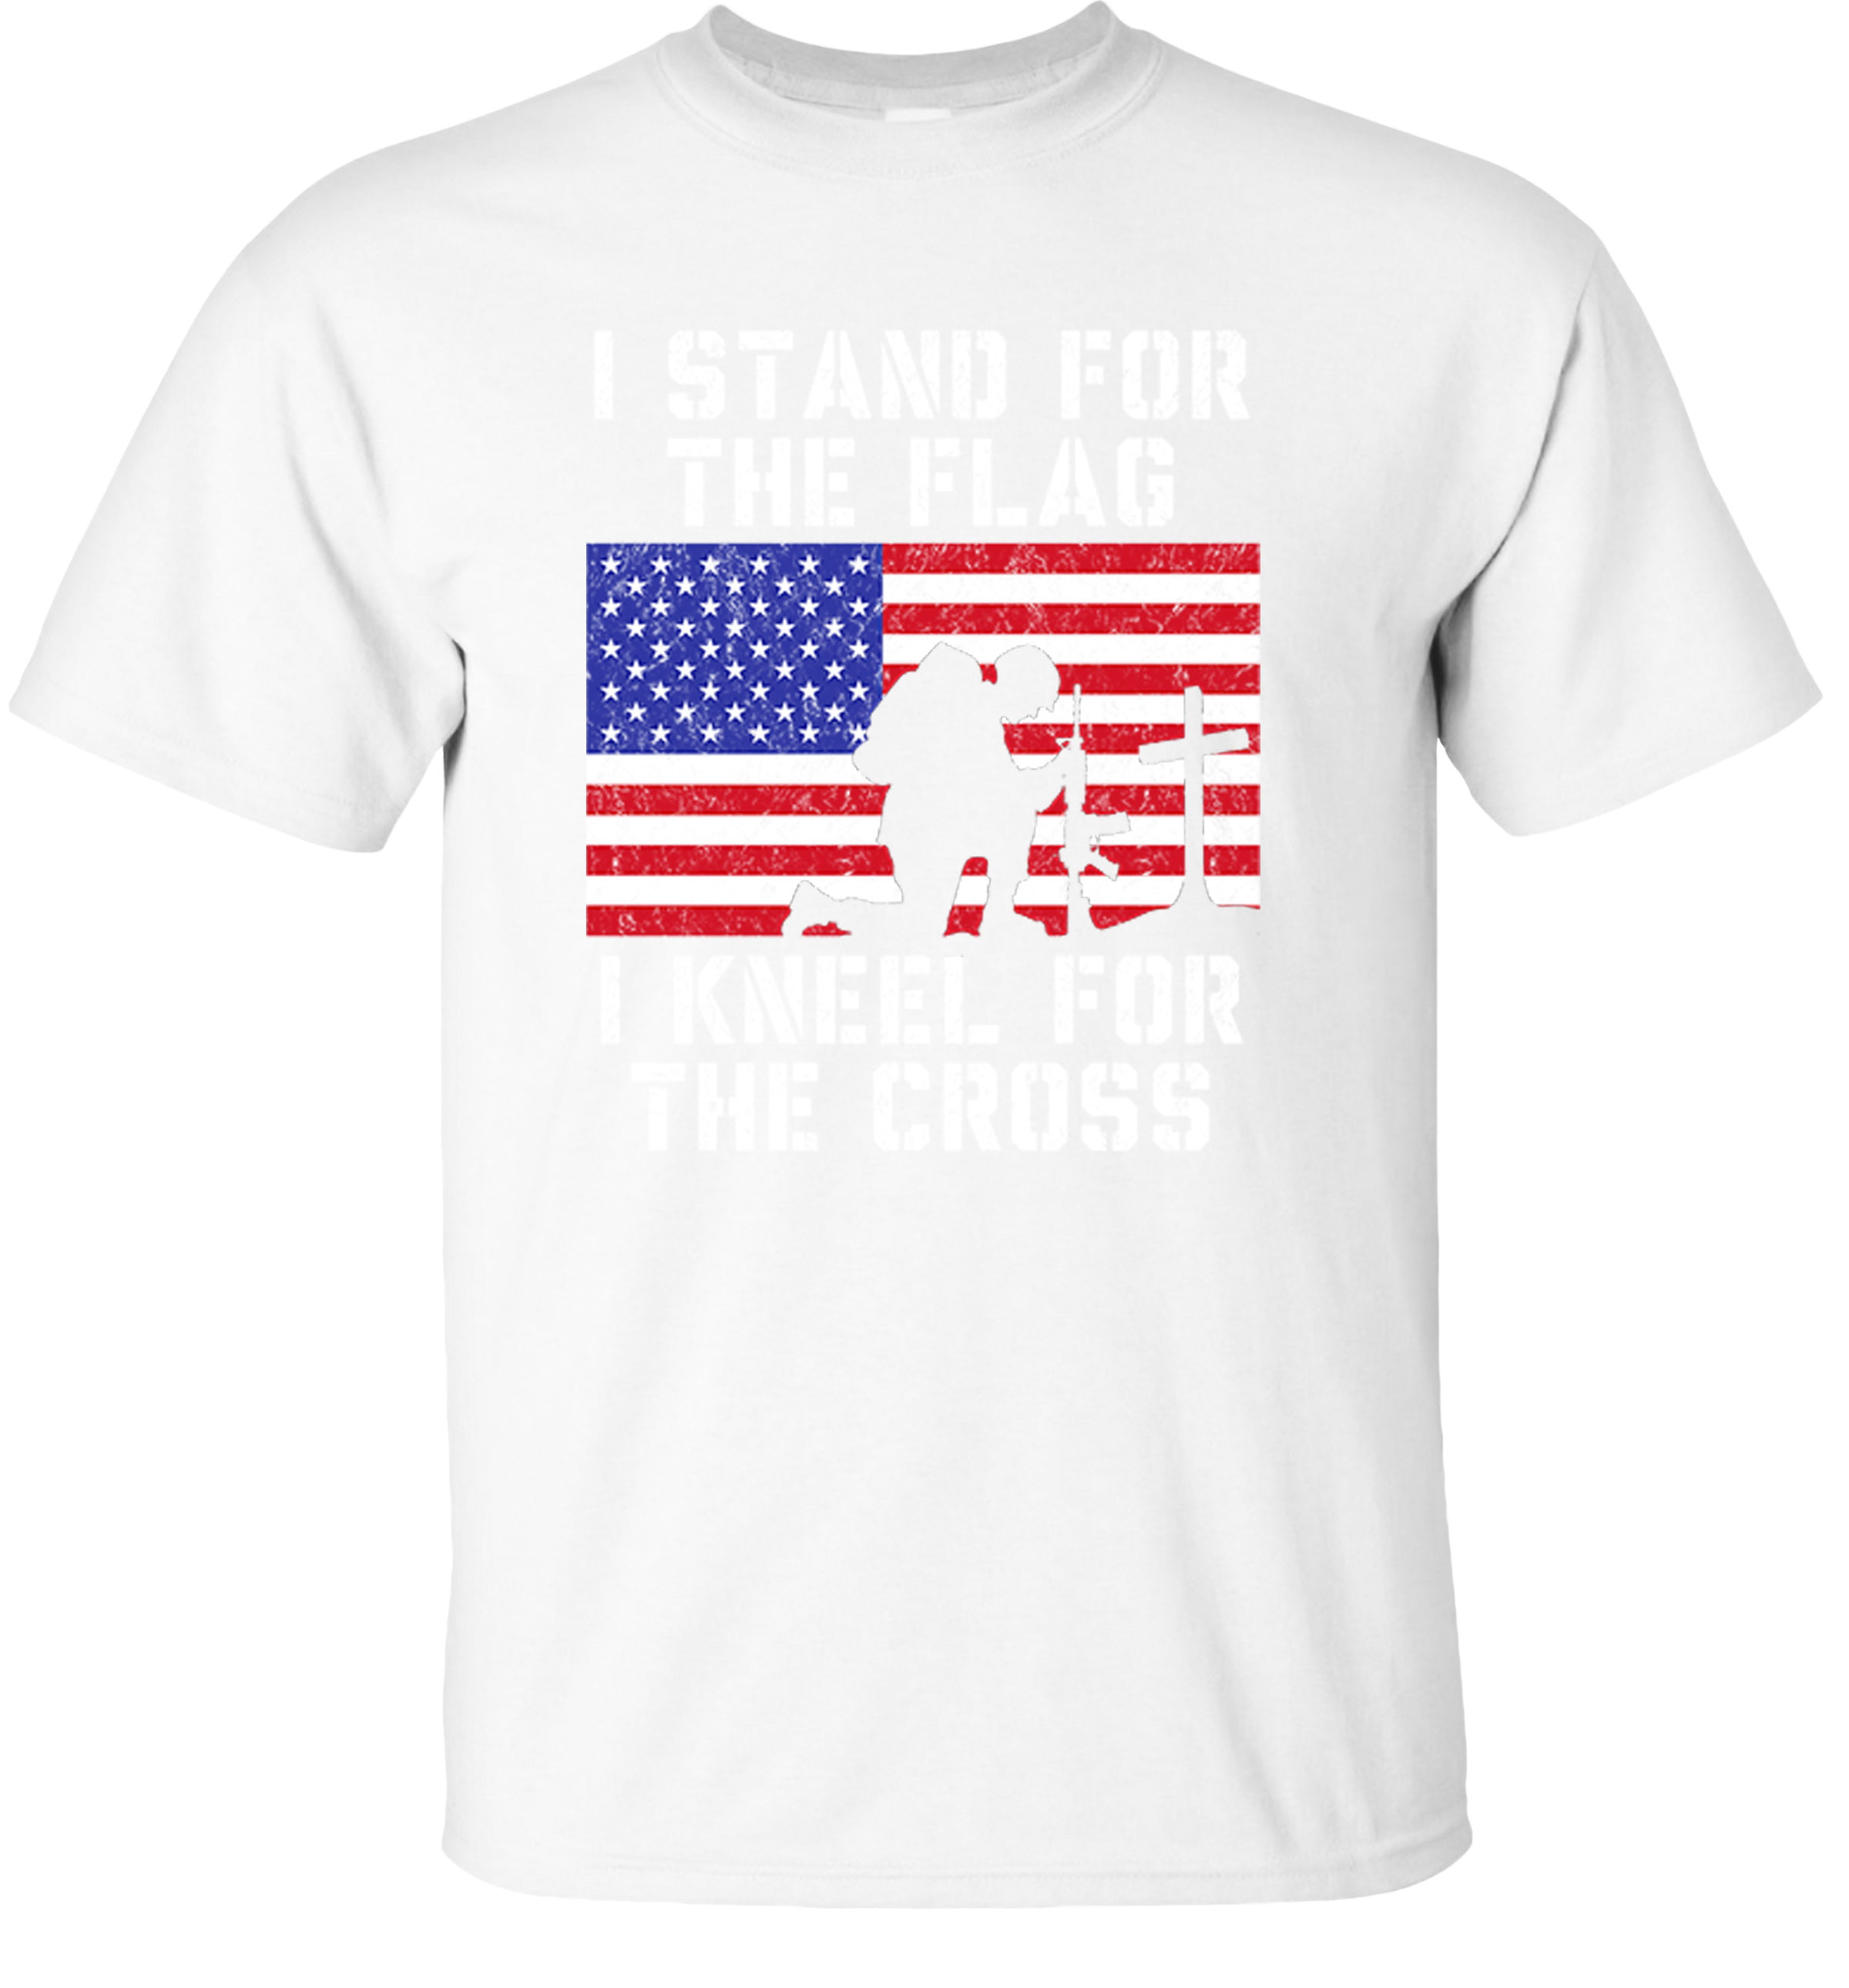 Stand for The Flag and Kneel for The Cross Cotton Infant Girl Top Short Sleeve 